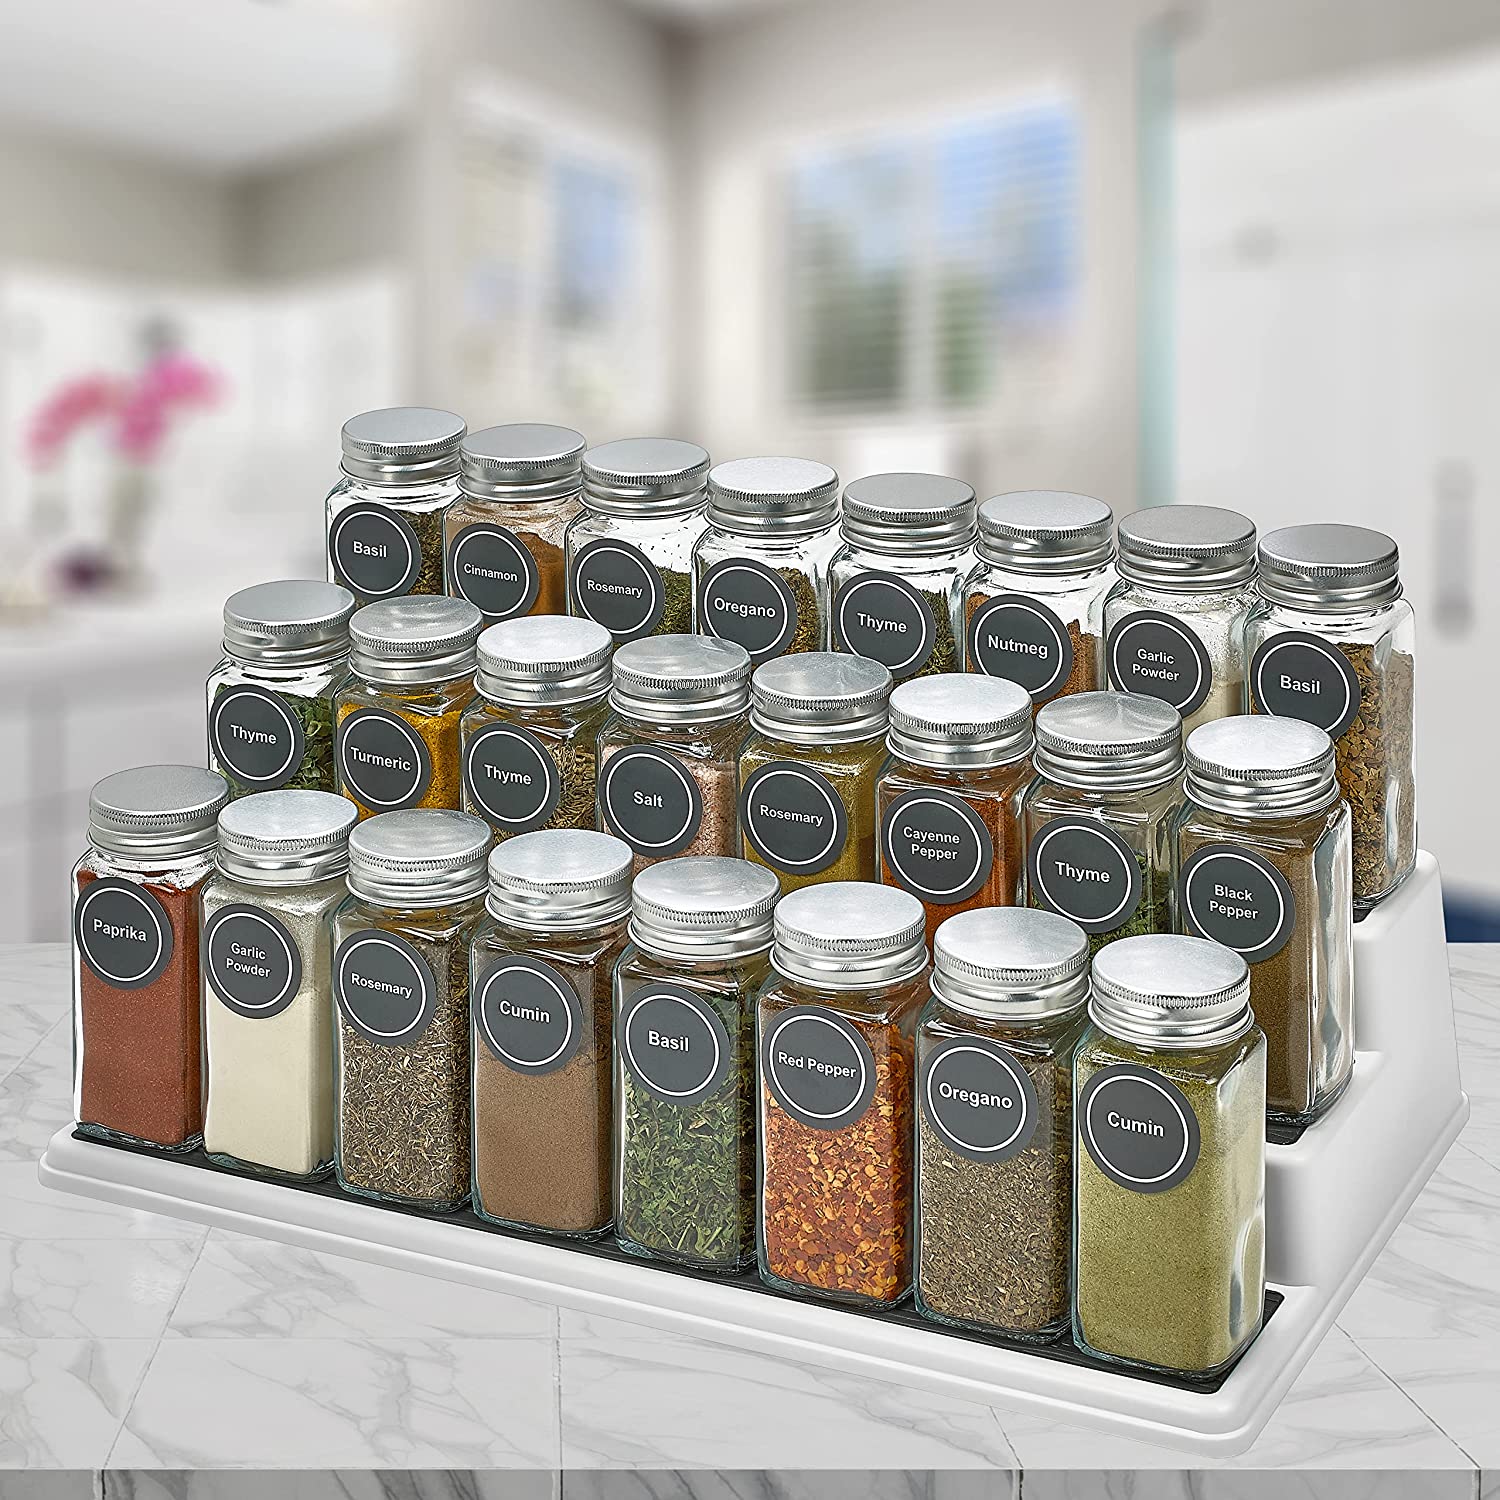 JARXSUN Glass Spice Jars with Label, 25Pcs Spice Jars with Shaker Lids-4 oz  Gold Spice Seasoning Jars Bottles Containers Set for Spice Rack (25)